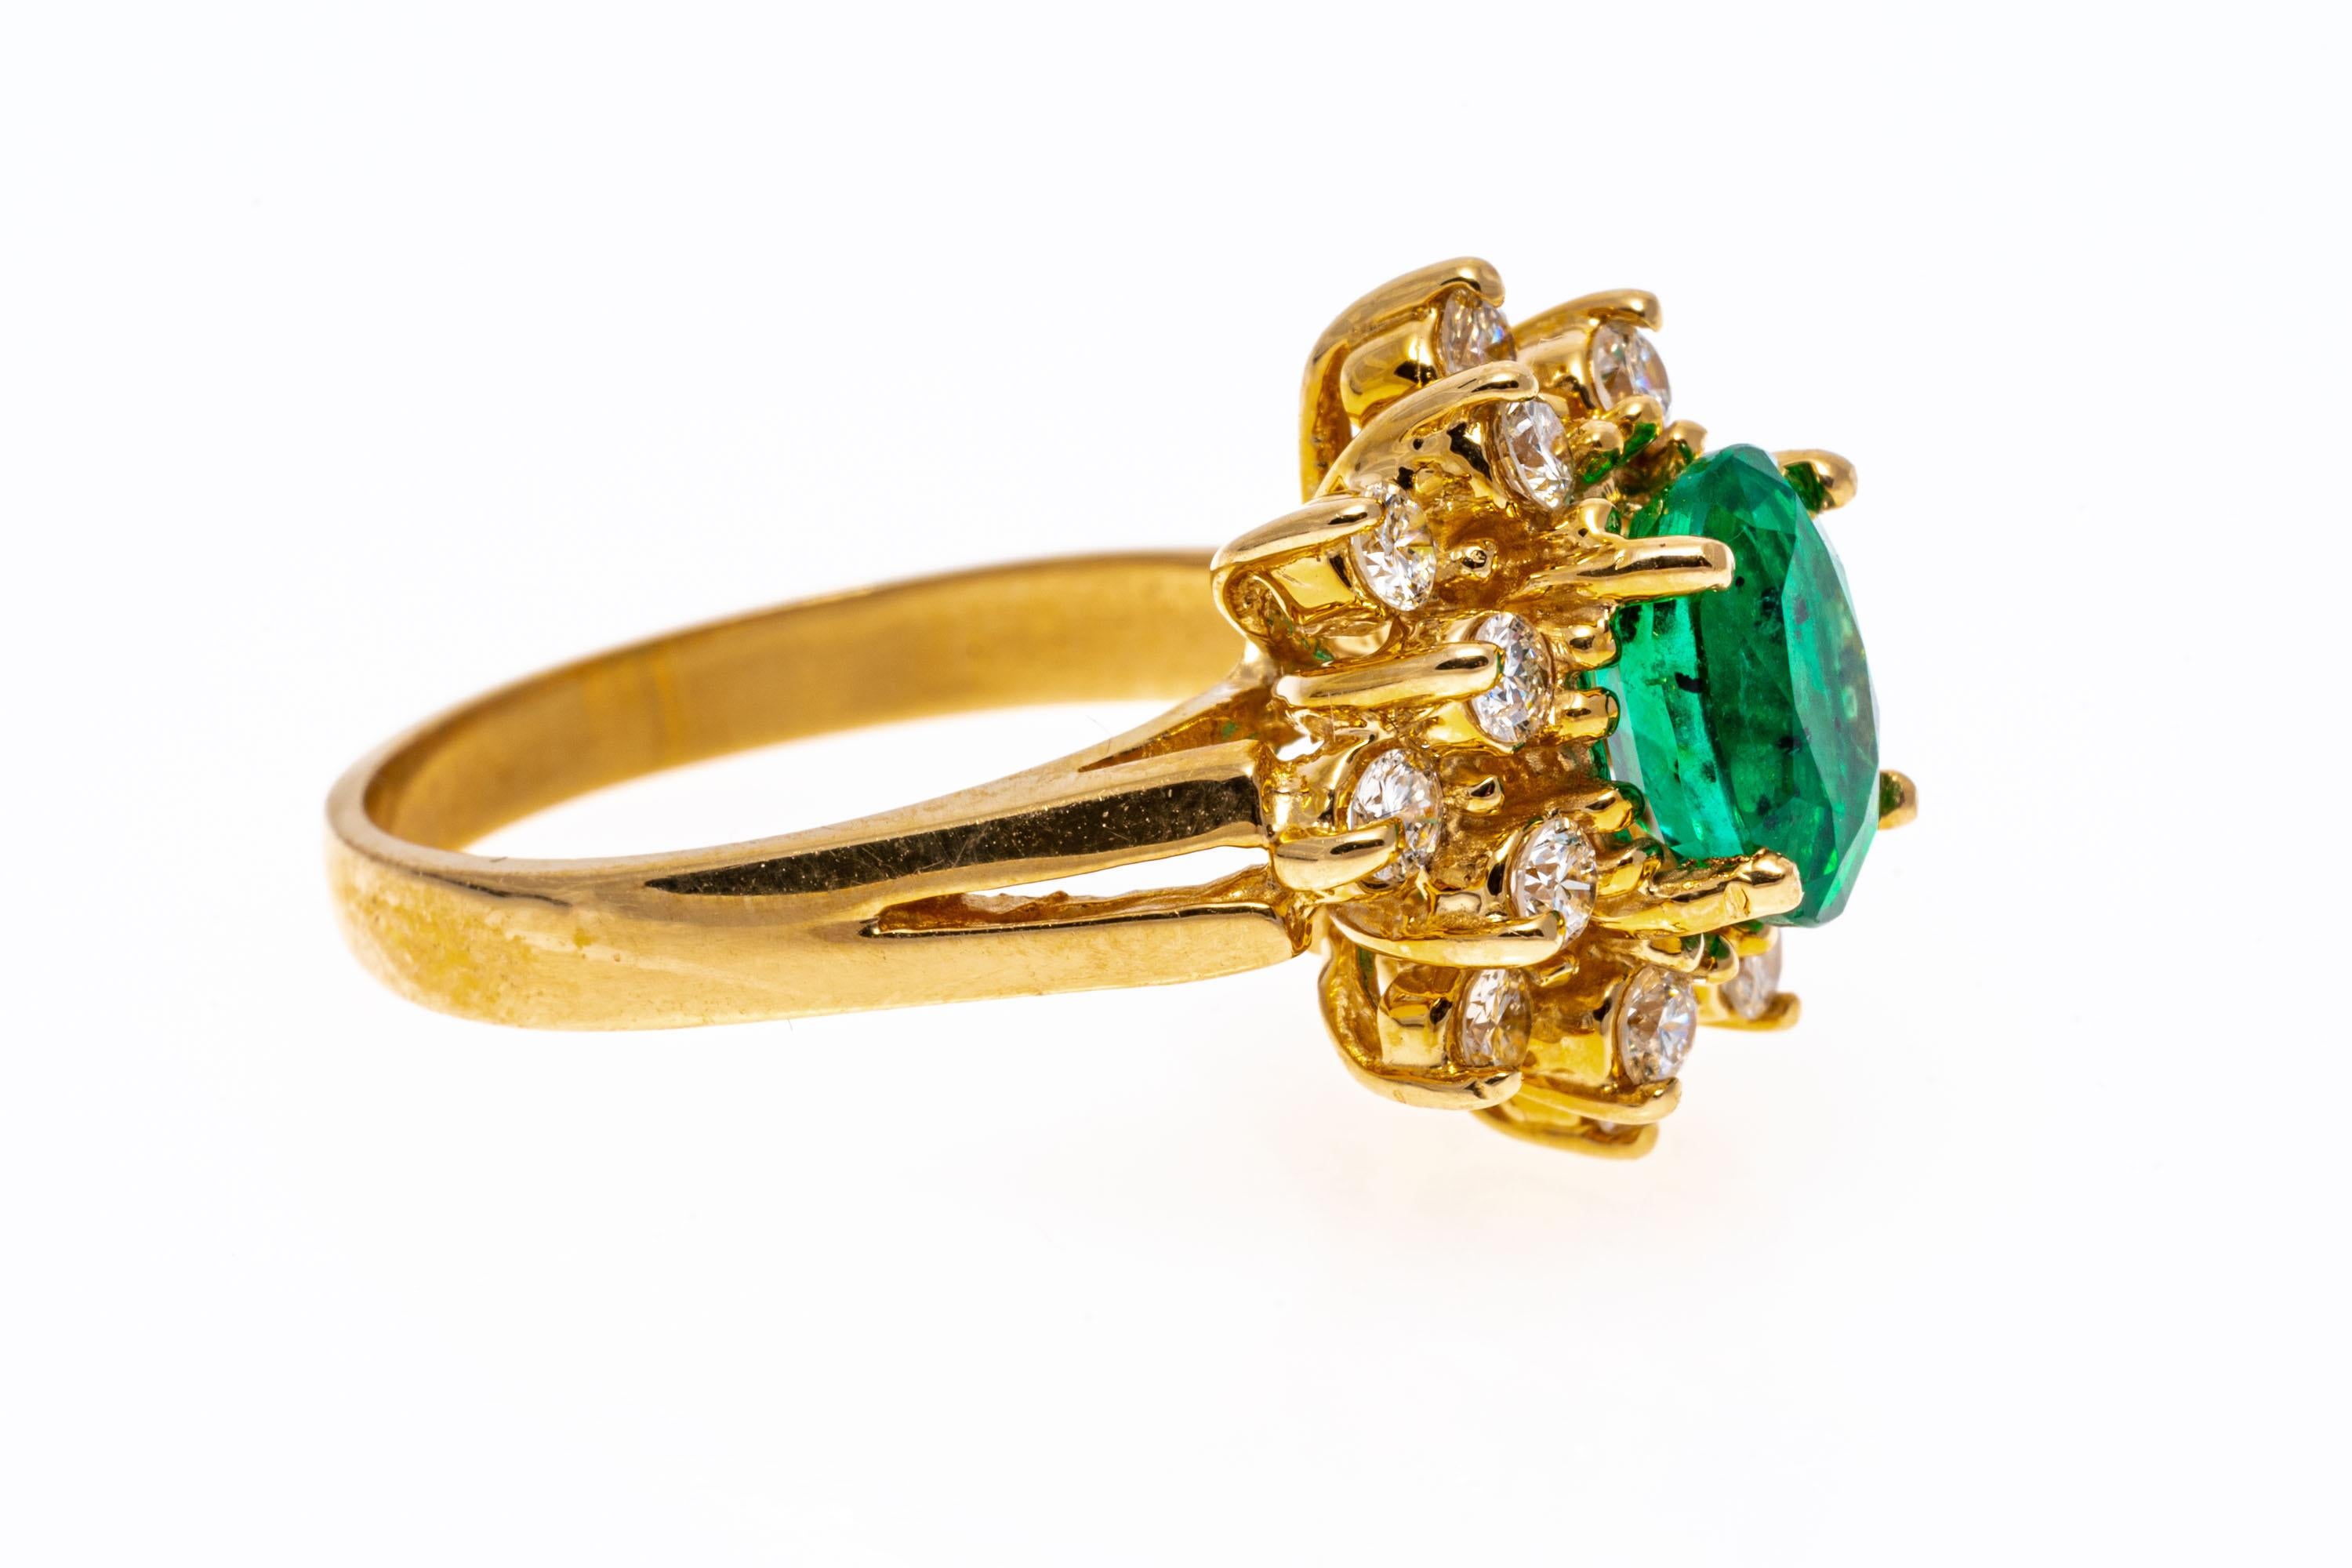 14k yellow gold ring. This lovely ring has a center oval faceted, medium green color emerald, approximately 0.86 CTS and prong set, surrounded by a double halo of round brilliant faceted diamonds, approximately 0.40 TCW, and also prong set. The ring